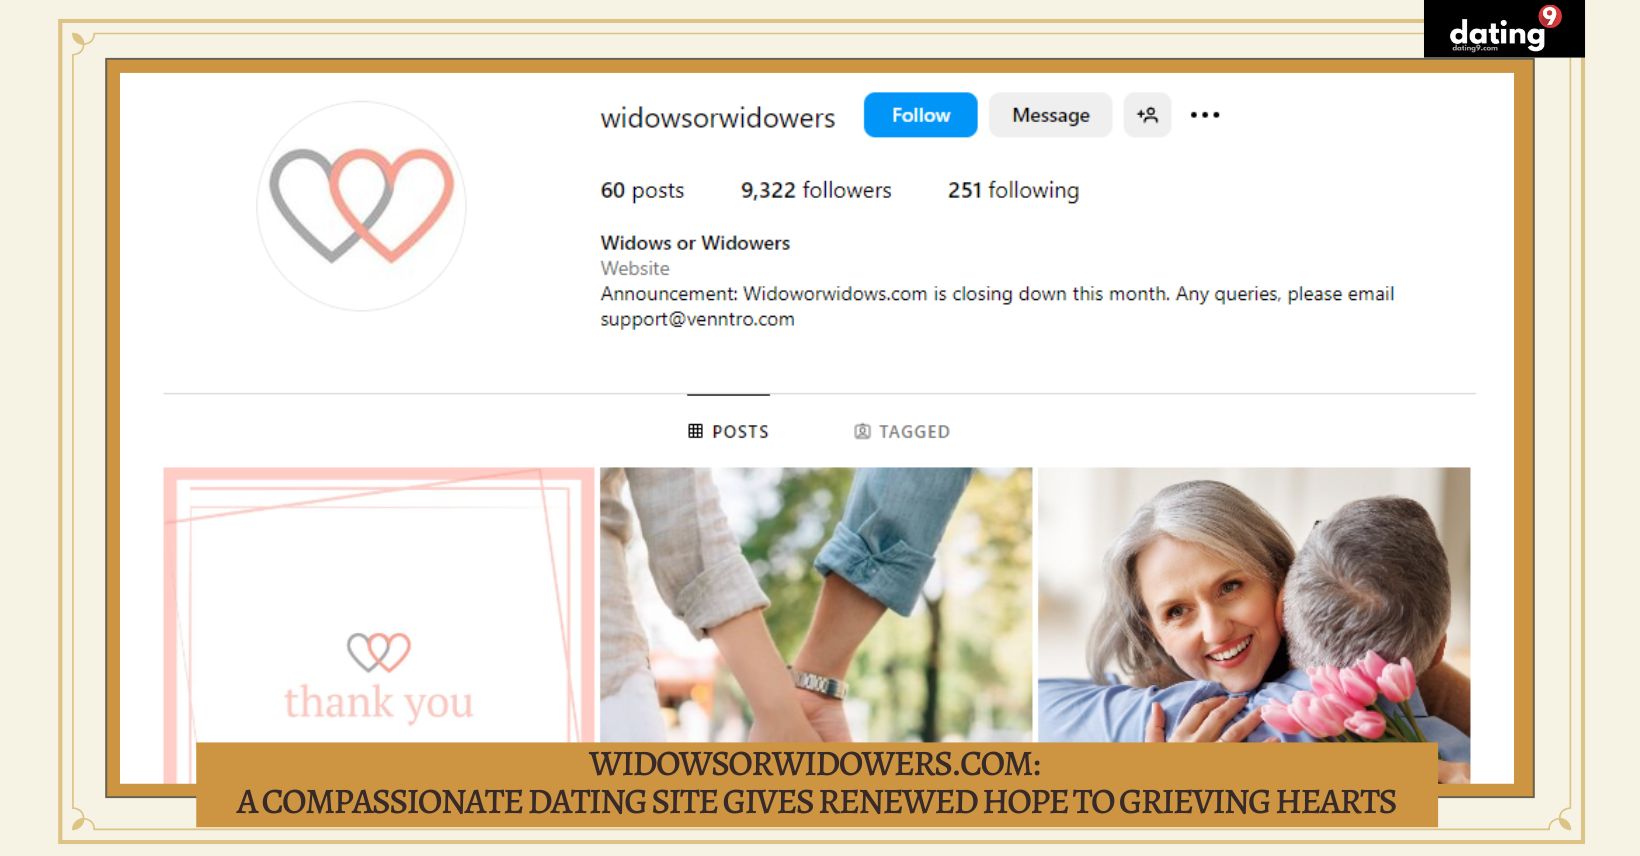 WidowsorWidowers.com: A Compassionate Dating Site Gives Renewed Hope to Grieving Hearts